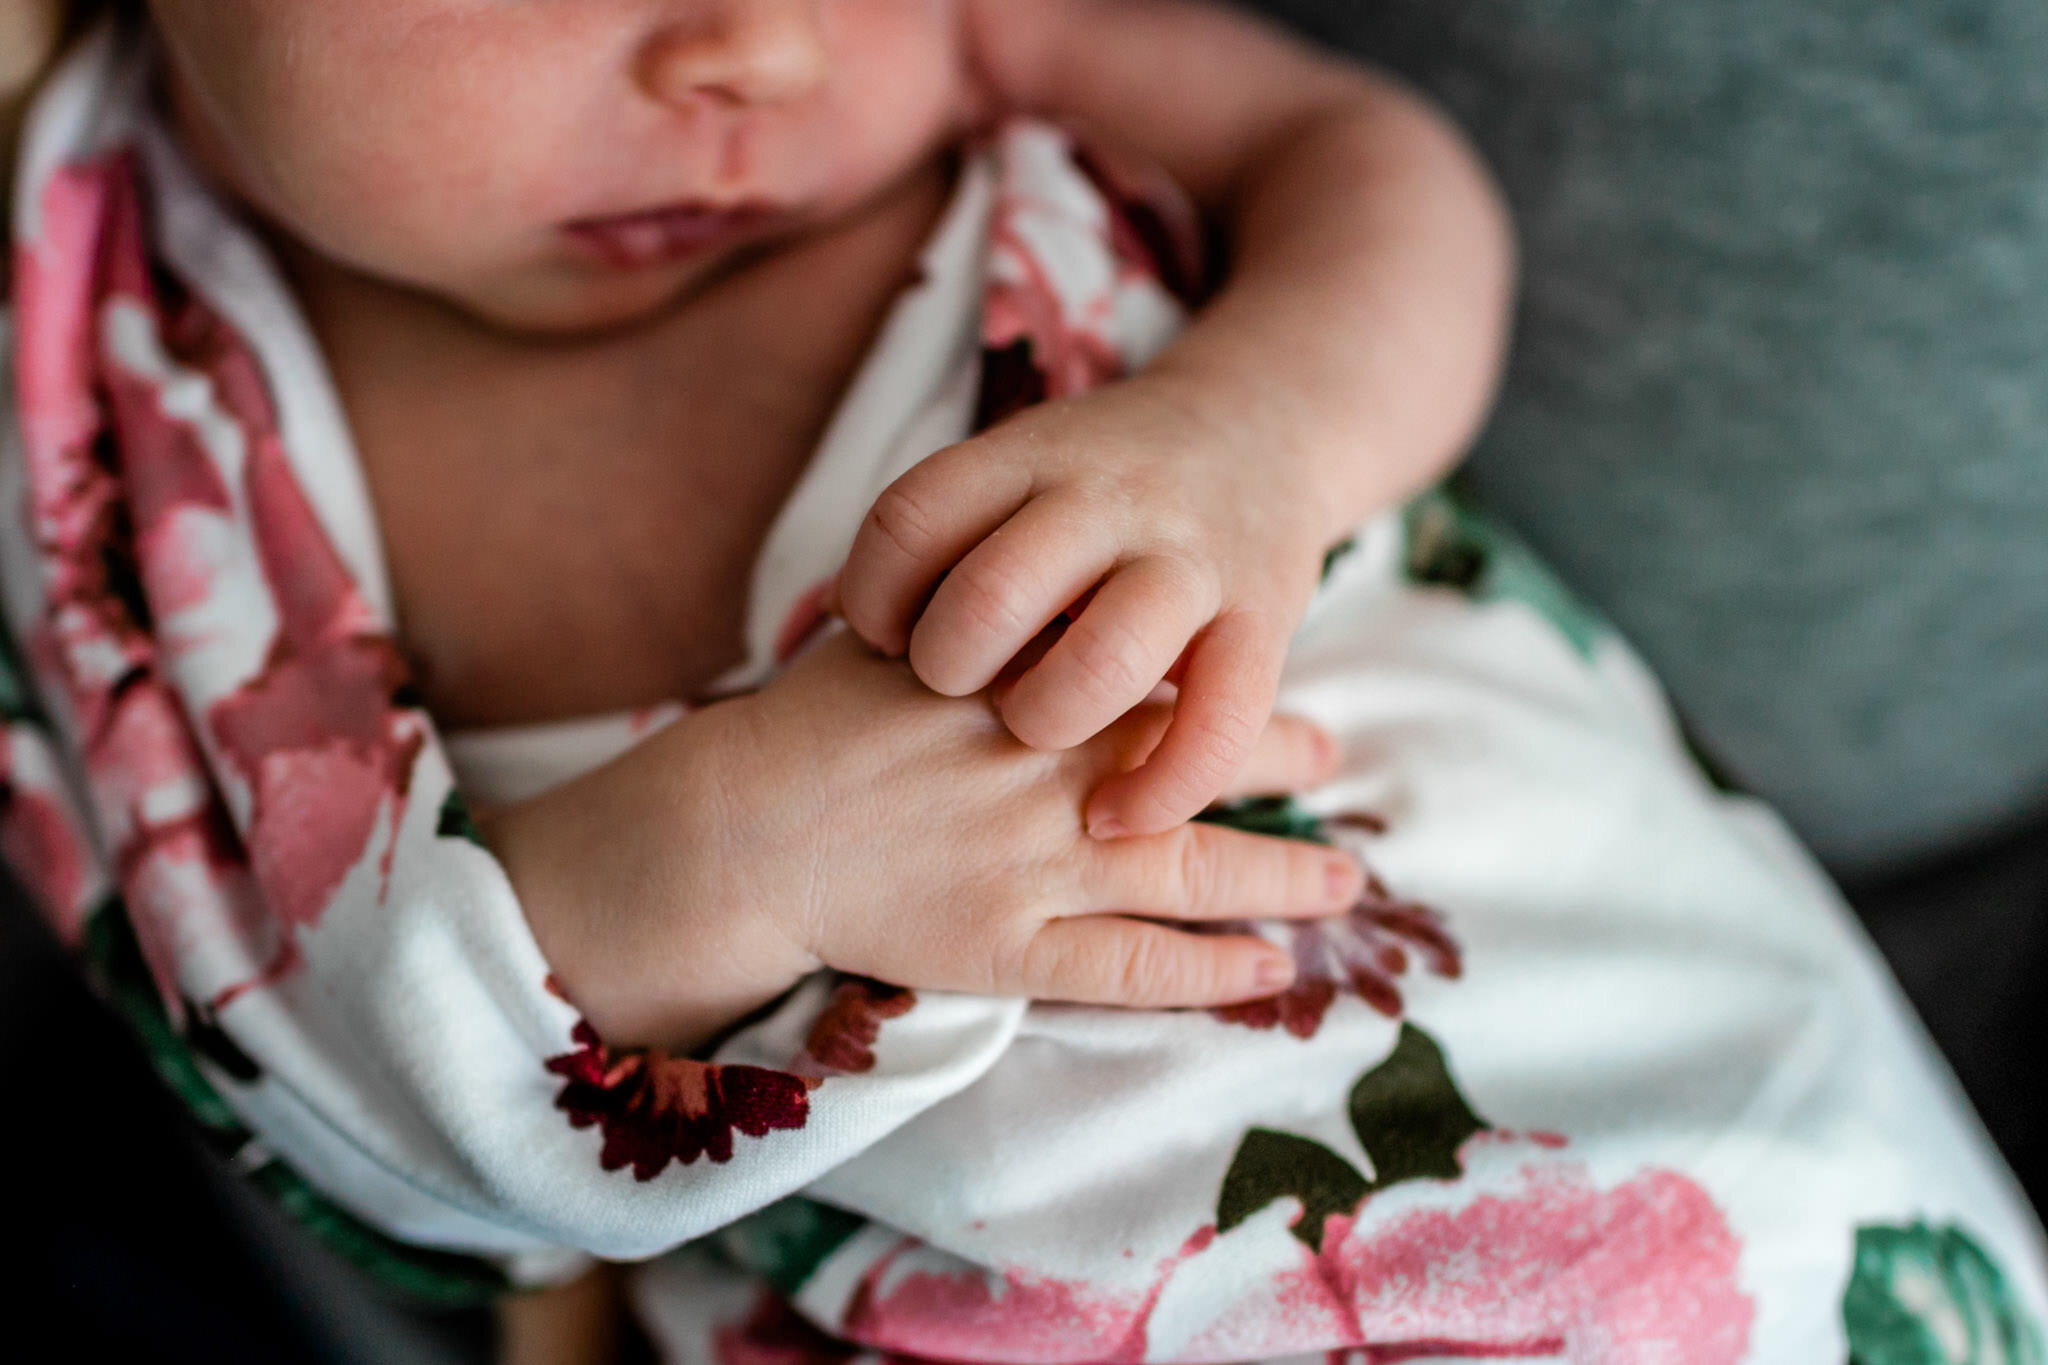 Hillsborough Newborn Photographer | By G. Lin Photography | Close up details of baby's hands